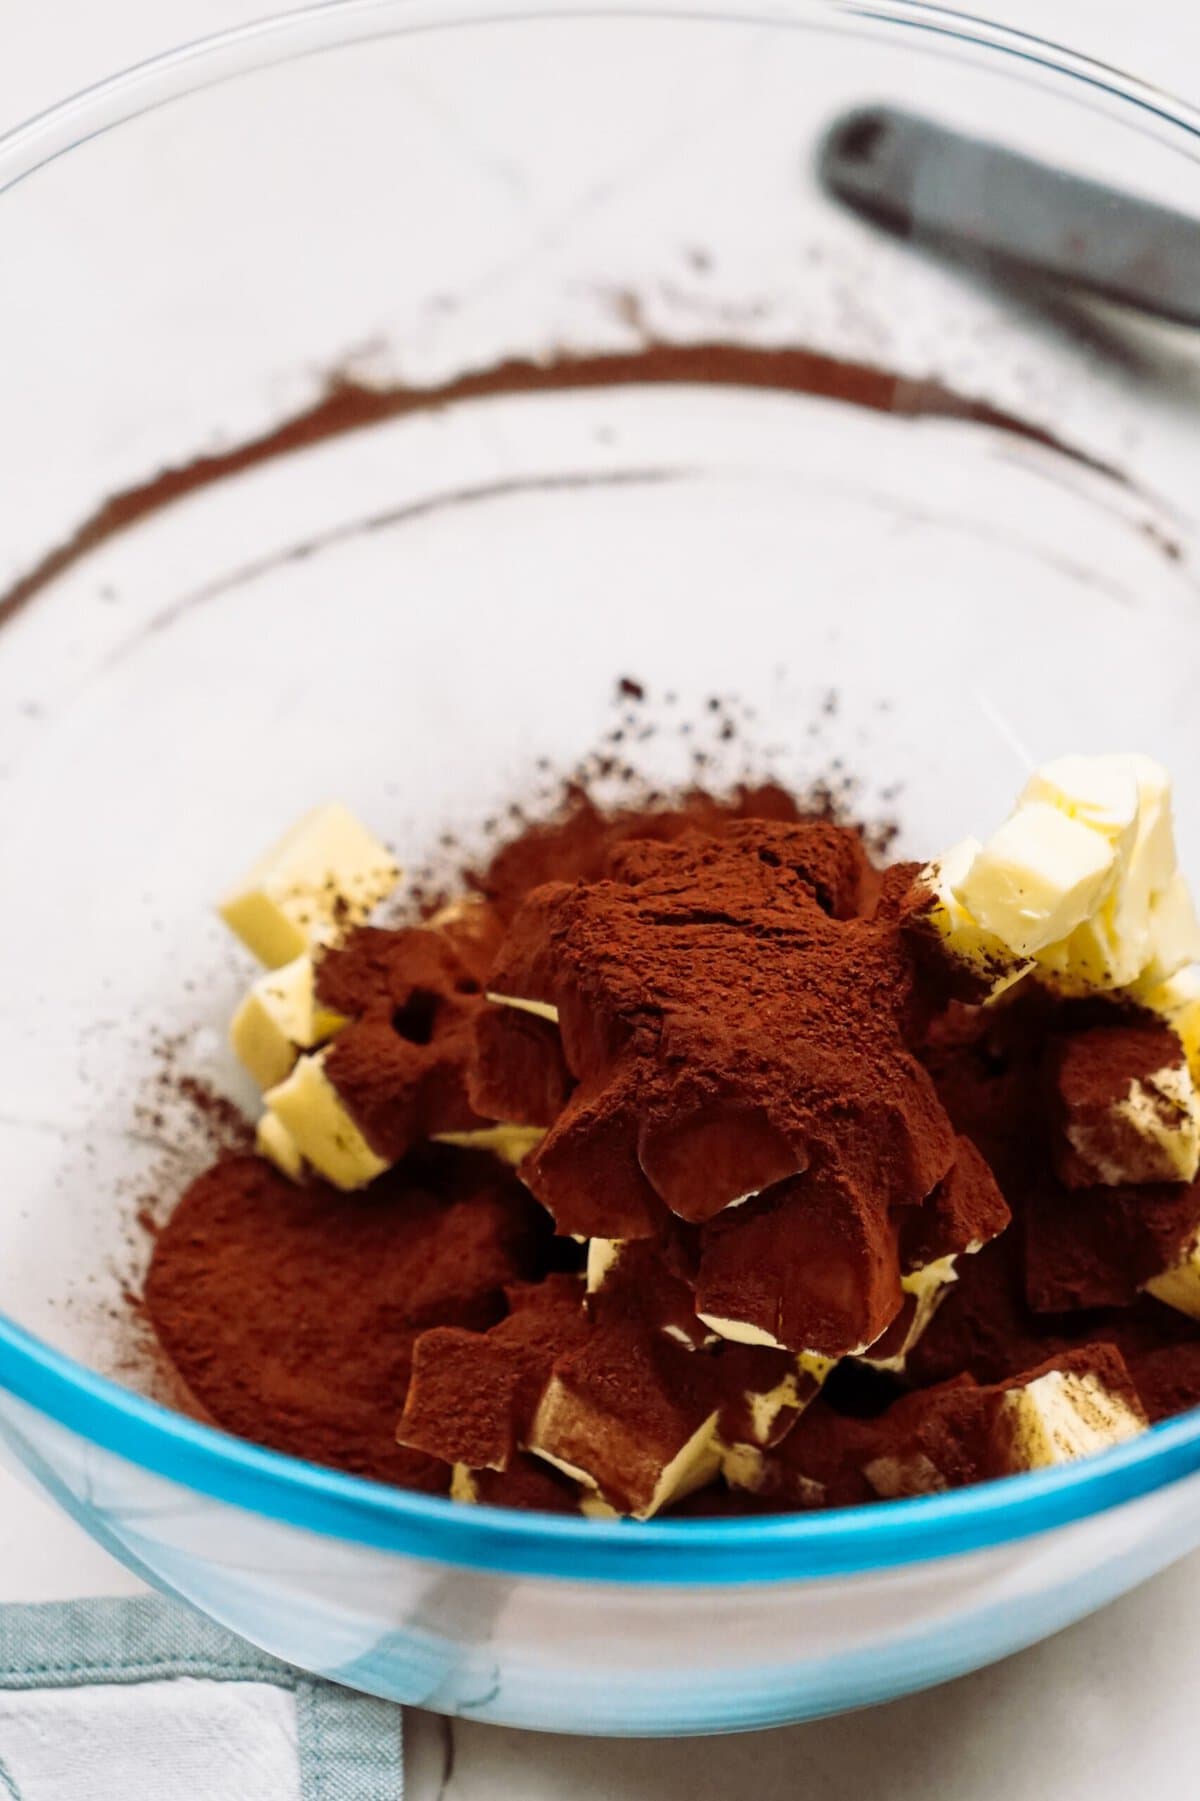 Cubed butter and cocoa powder in a glass mixing bowl.